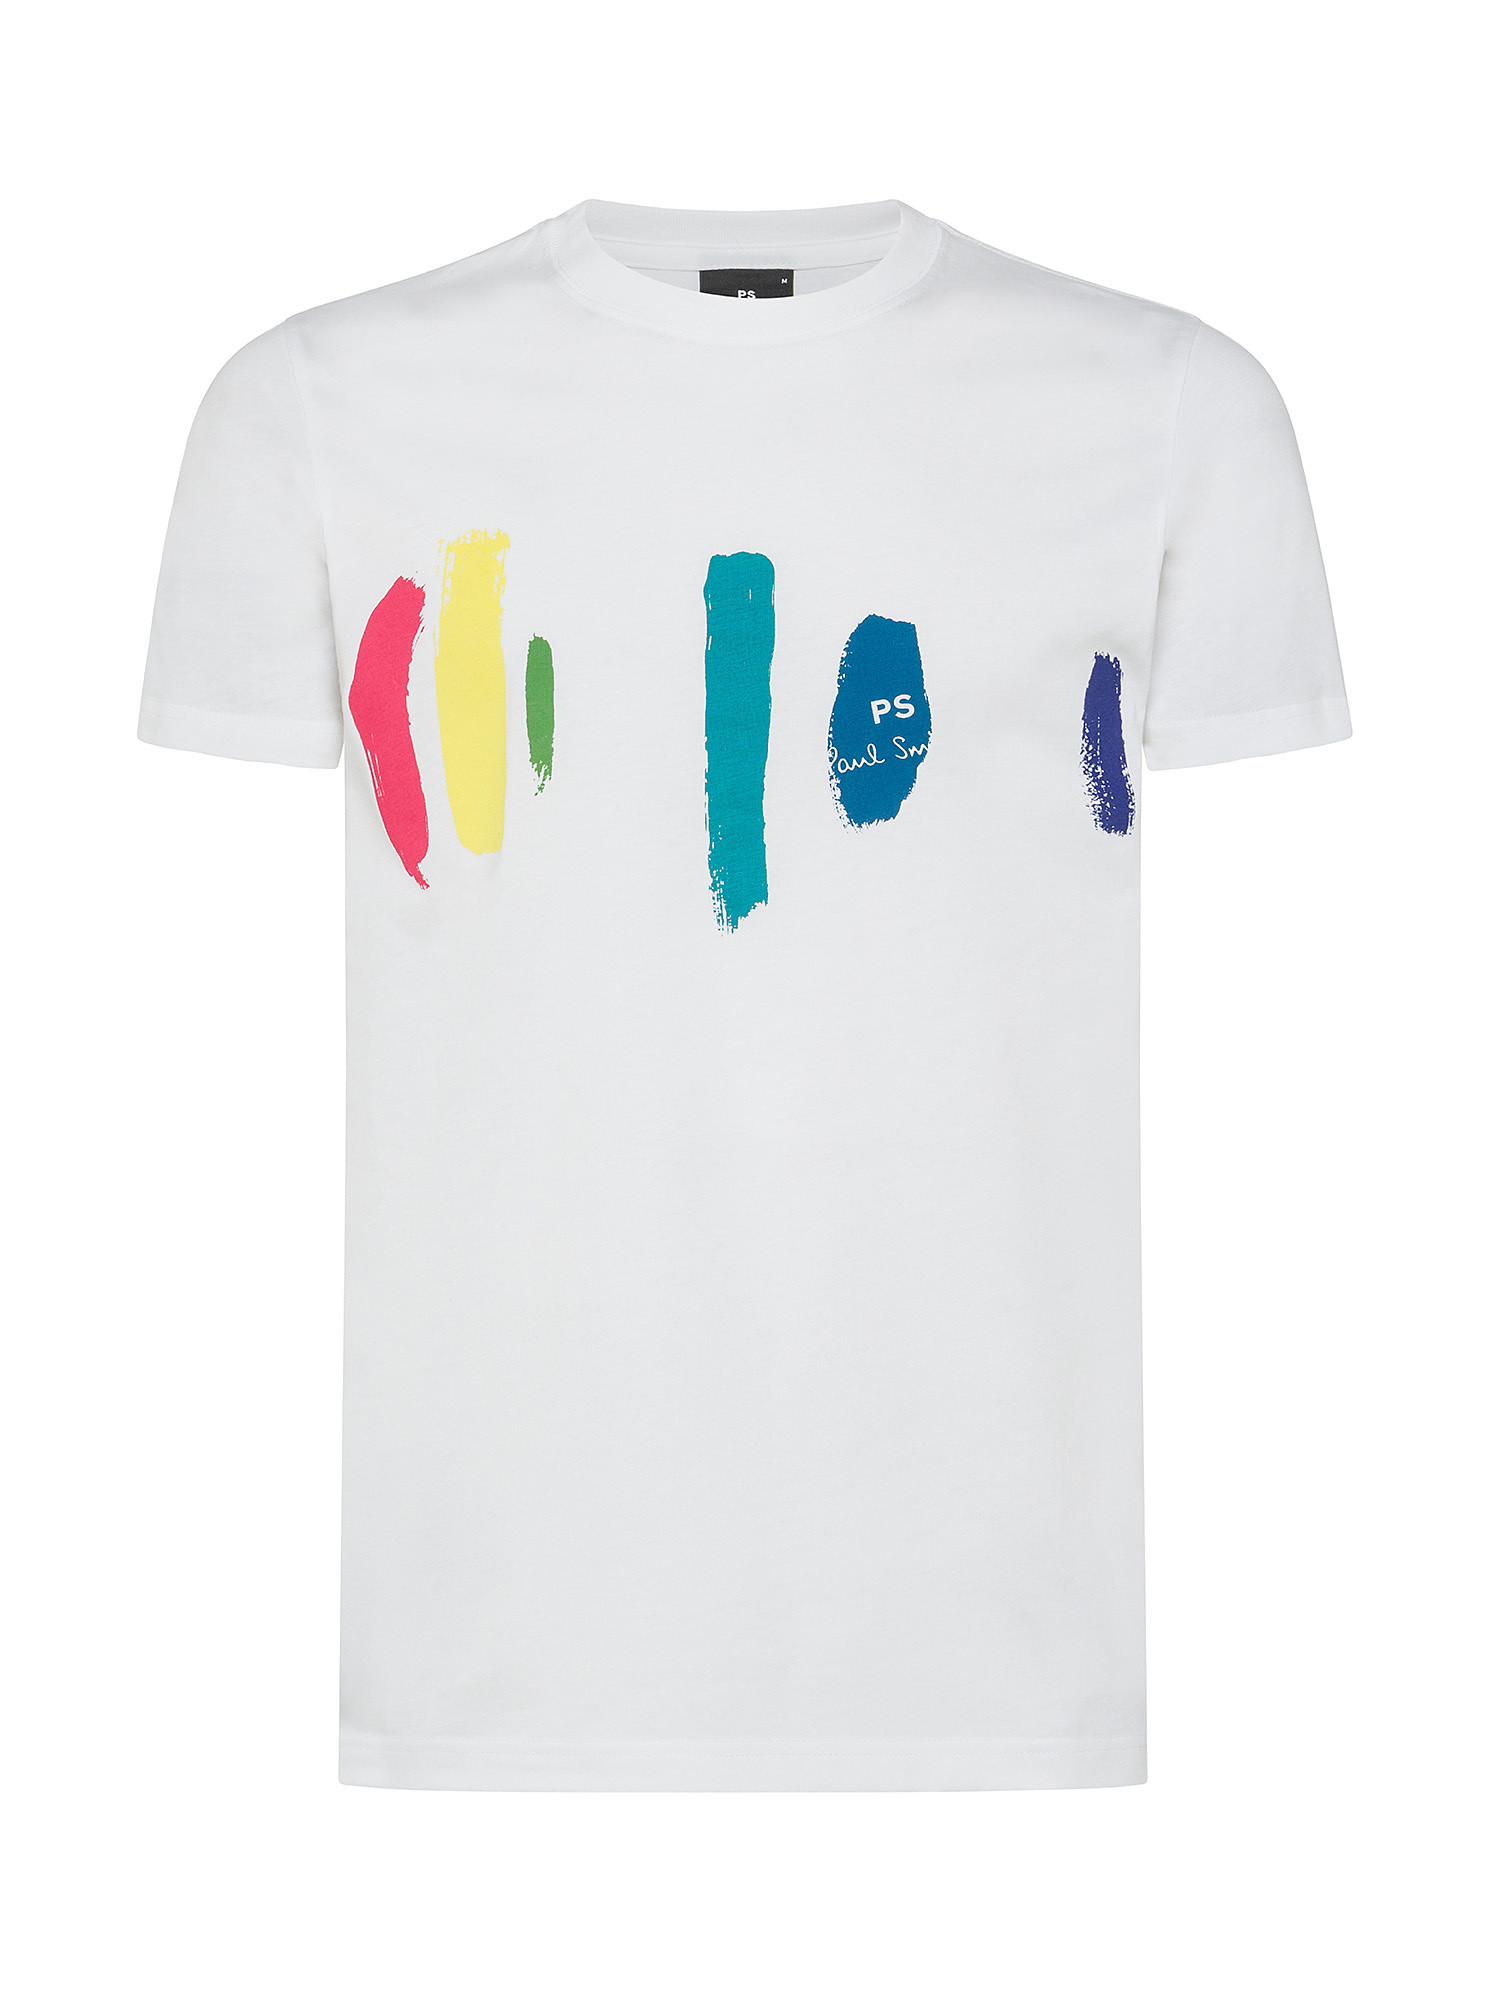 Paul Smith - T-shirt in cotone slim fit con stampa pennellate, Bianco, large image number 0